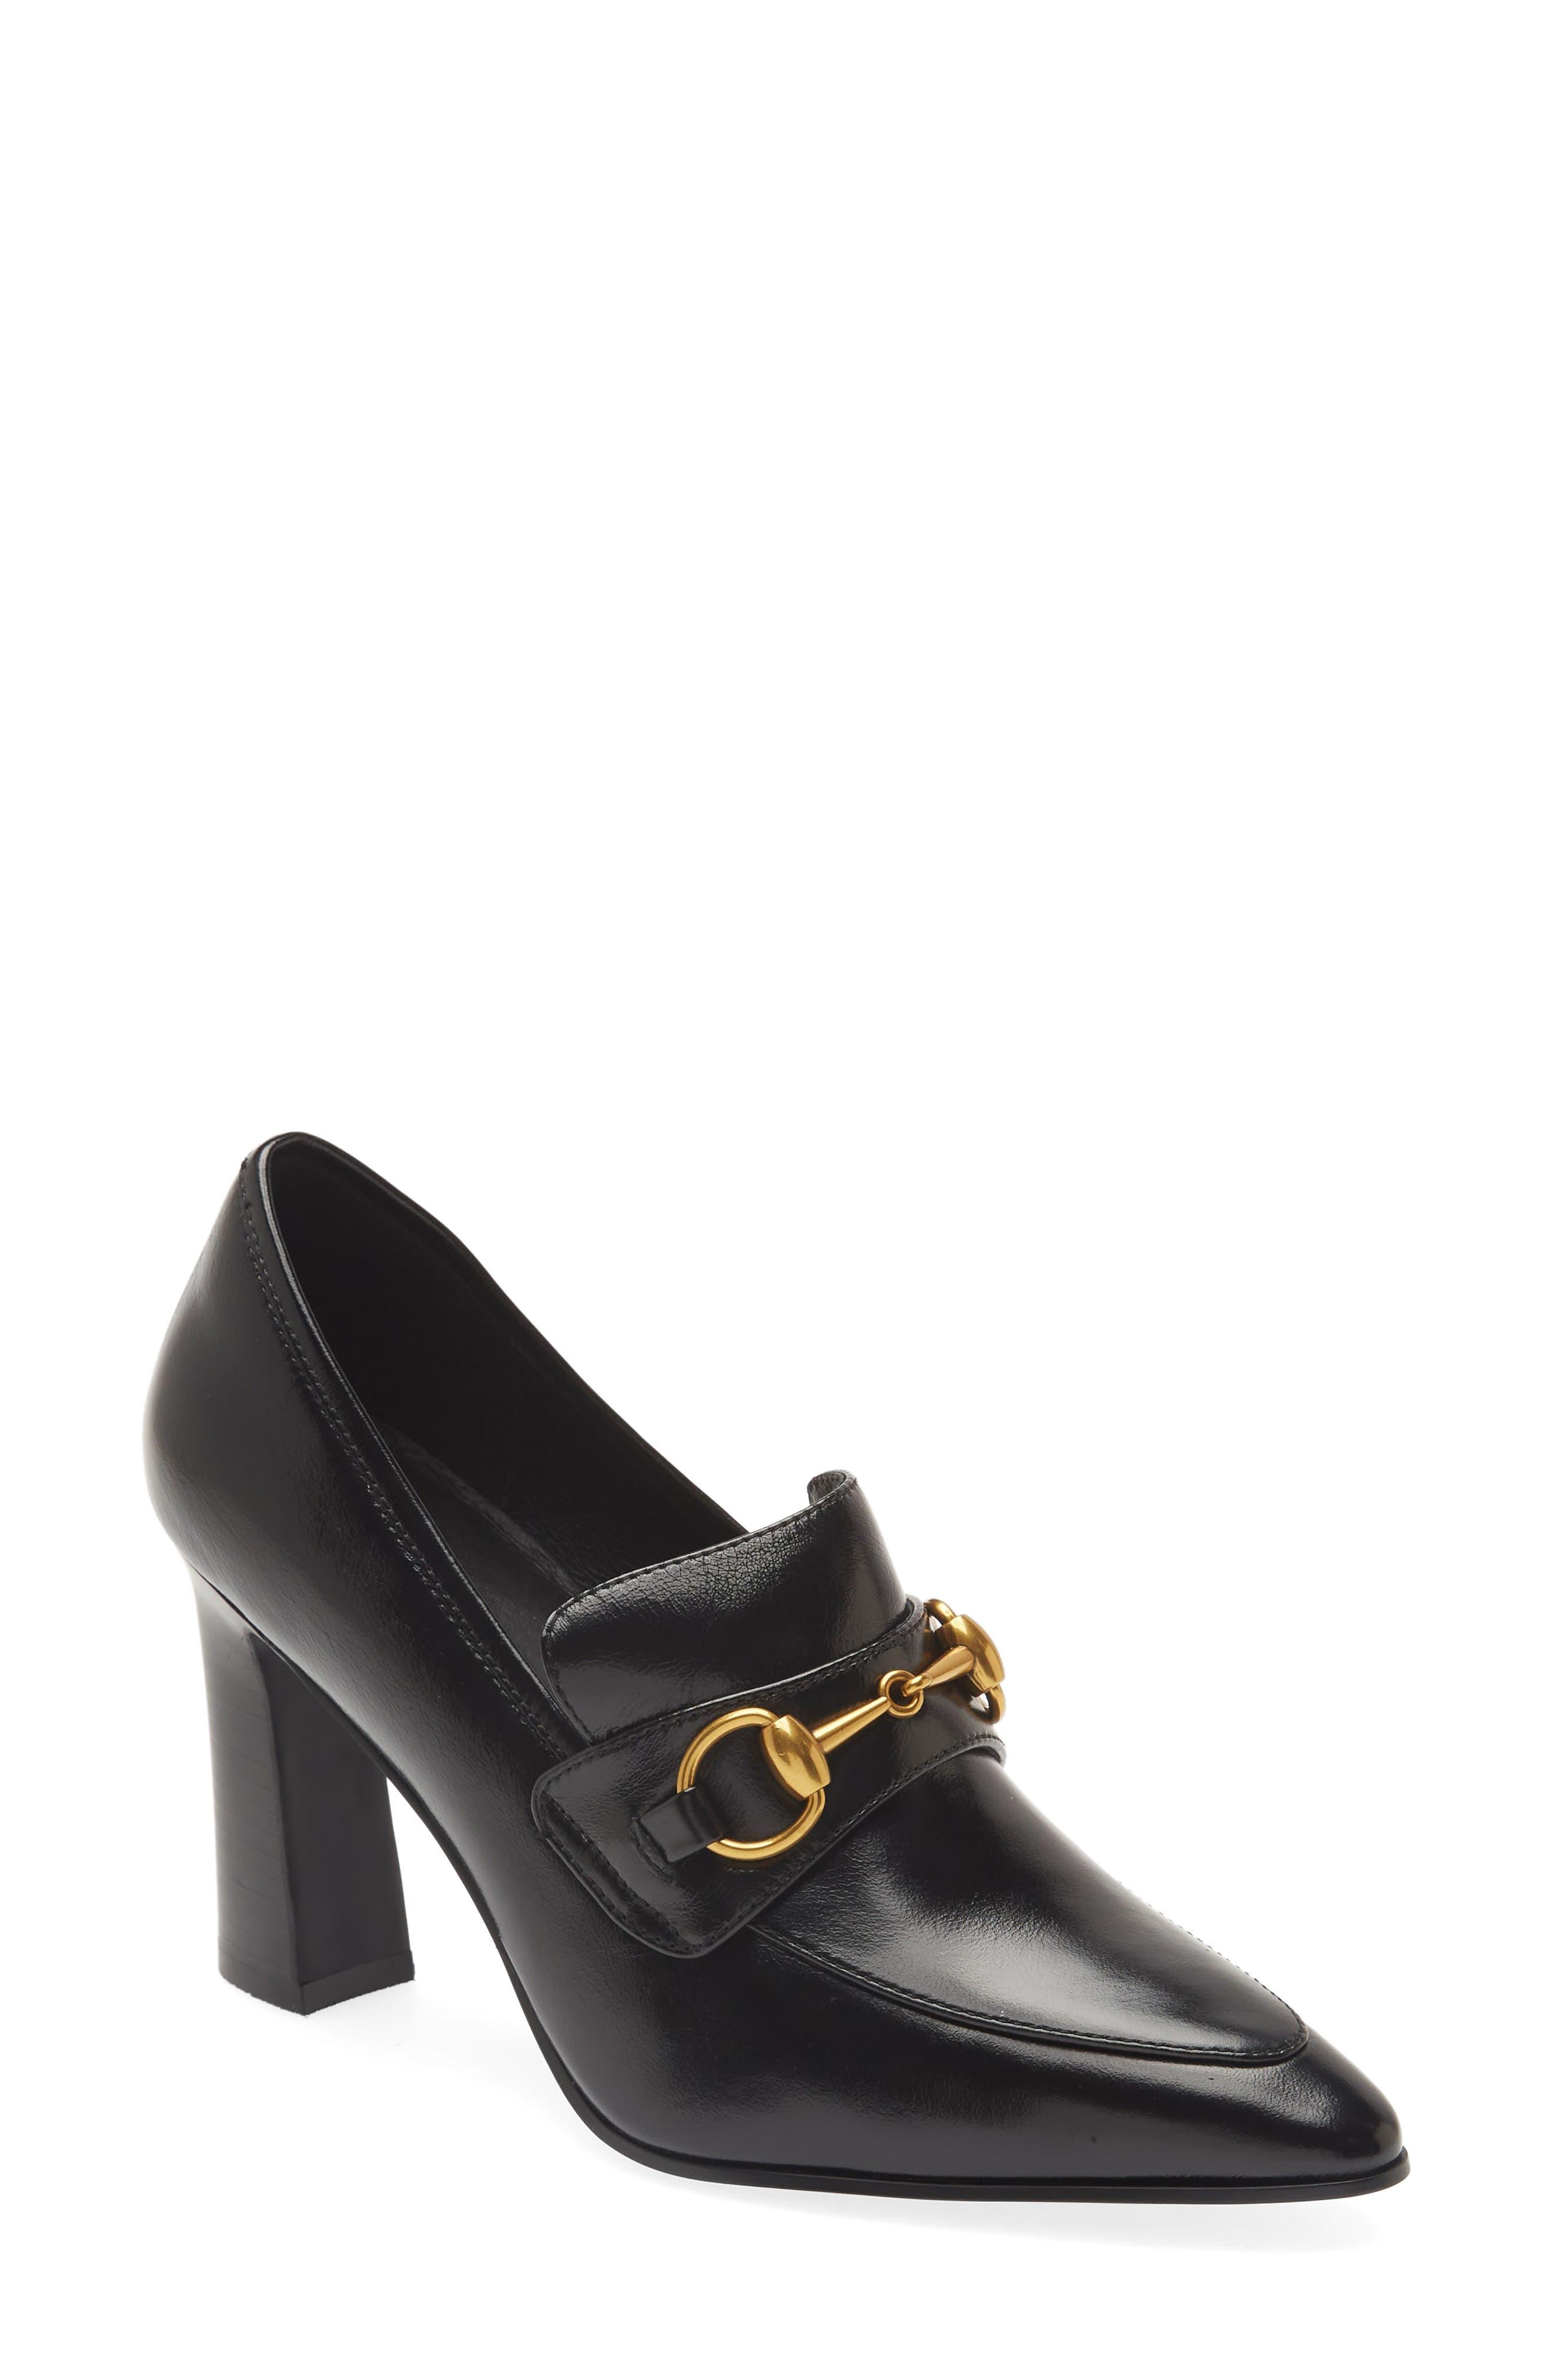 Jeffrey Campbell Etiquette Pointed Toe Pump in Black | Lyst